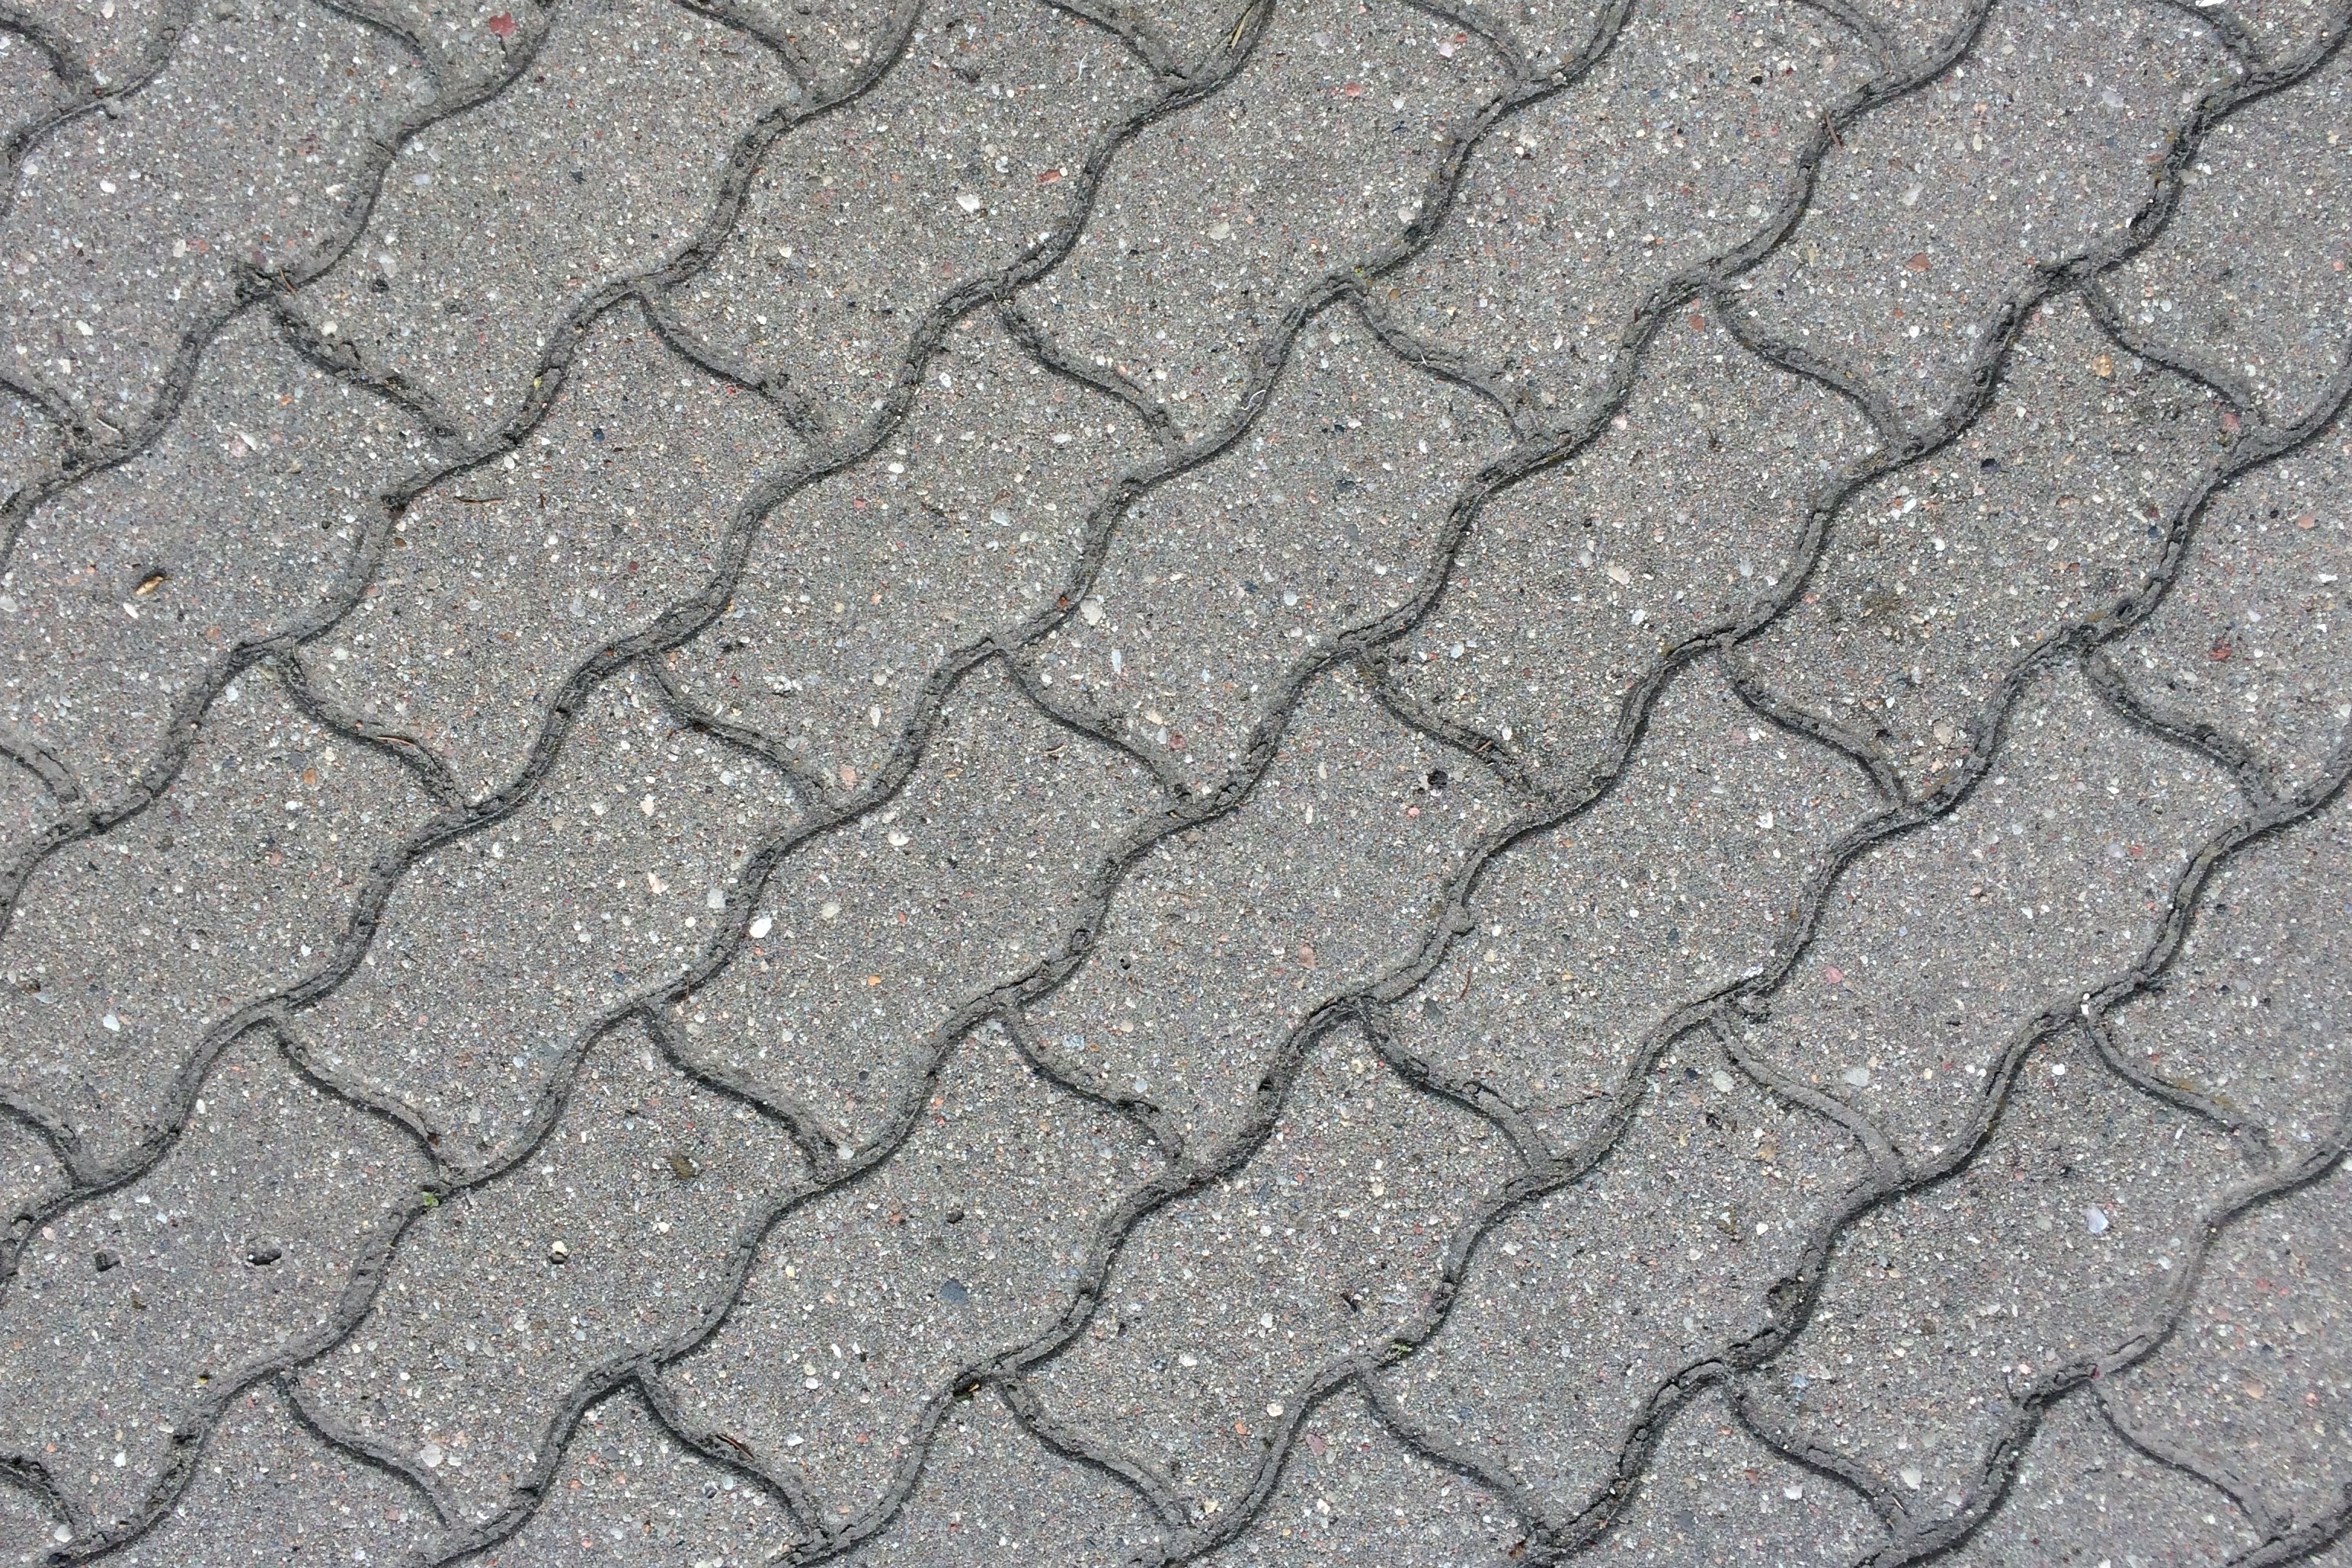 tessellation examples in real life